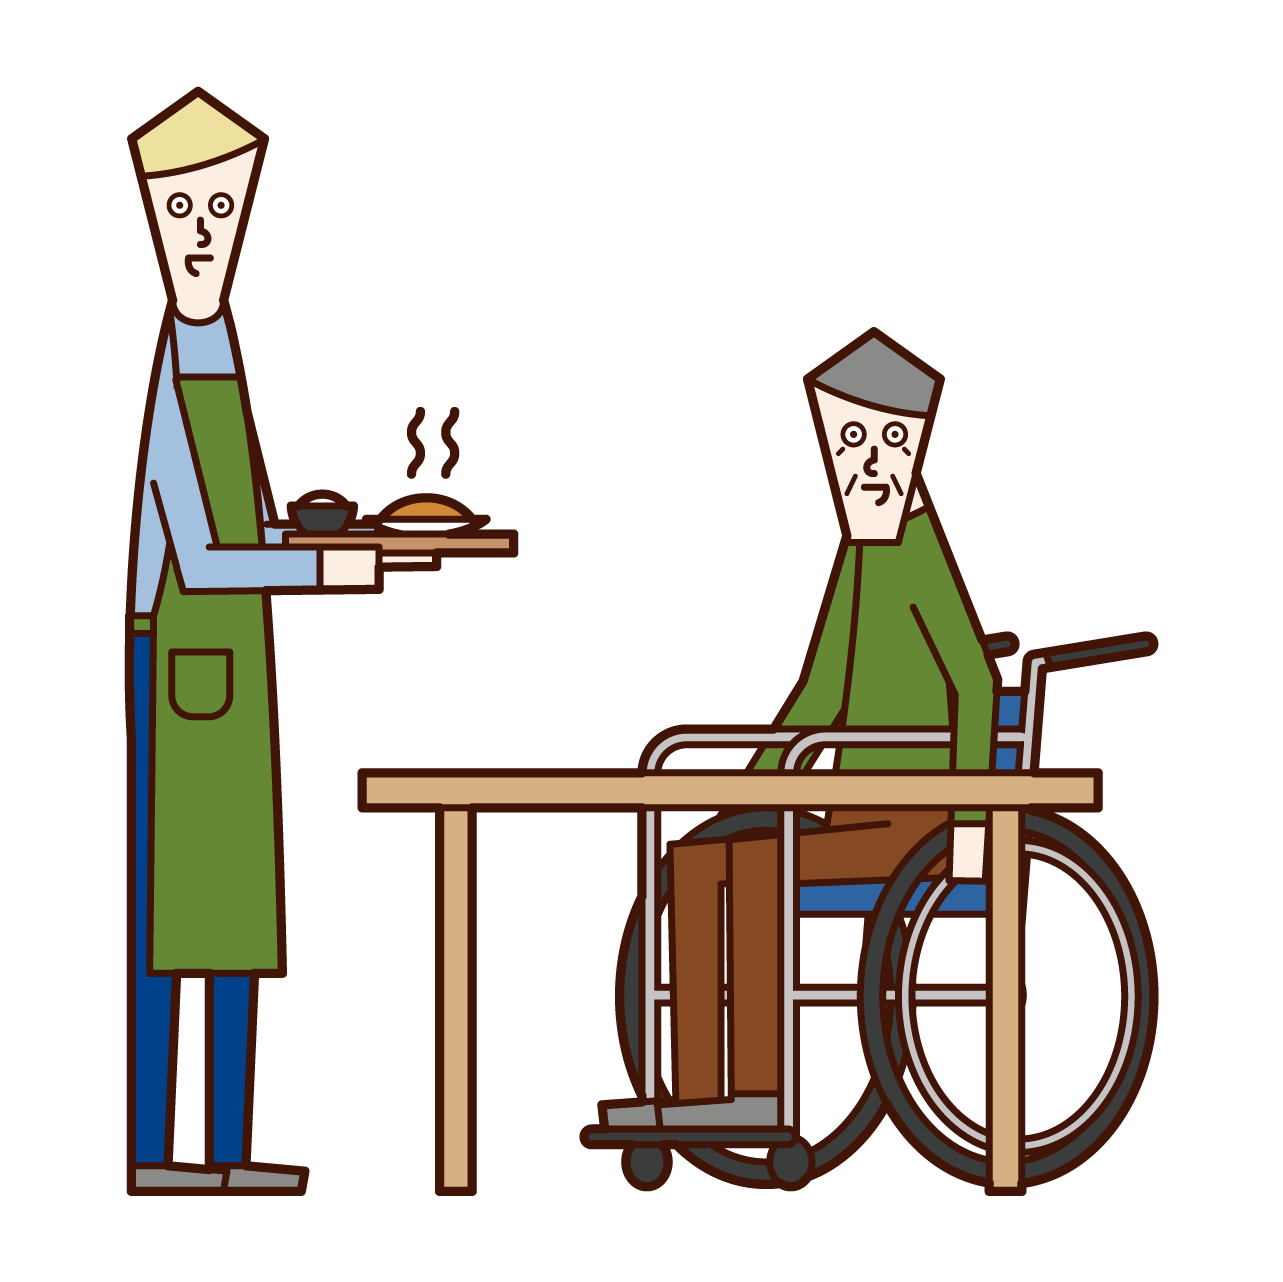 Illustration of care worker and home helper (man) who prepares meals